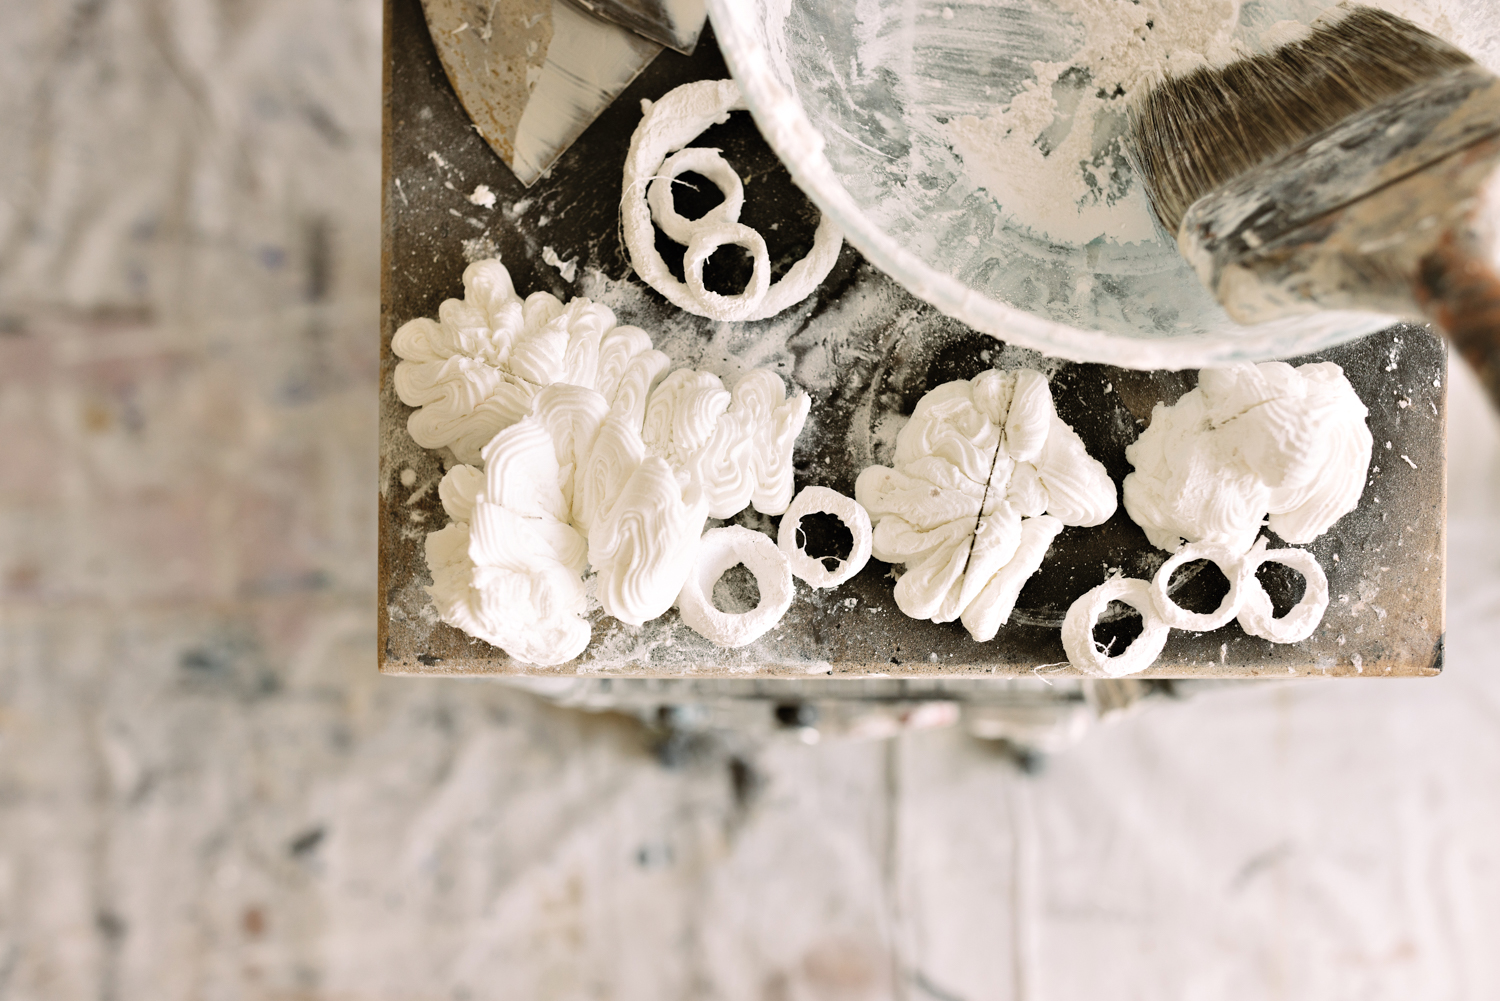 Small sculpted plaster pieces next to a bowl in which plaster is being mixed with a brush